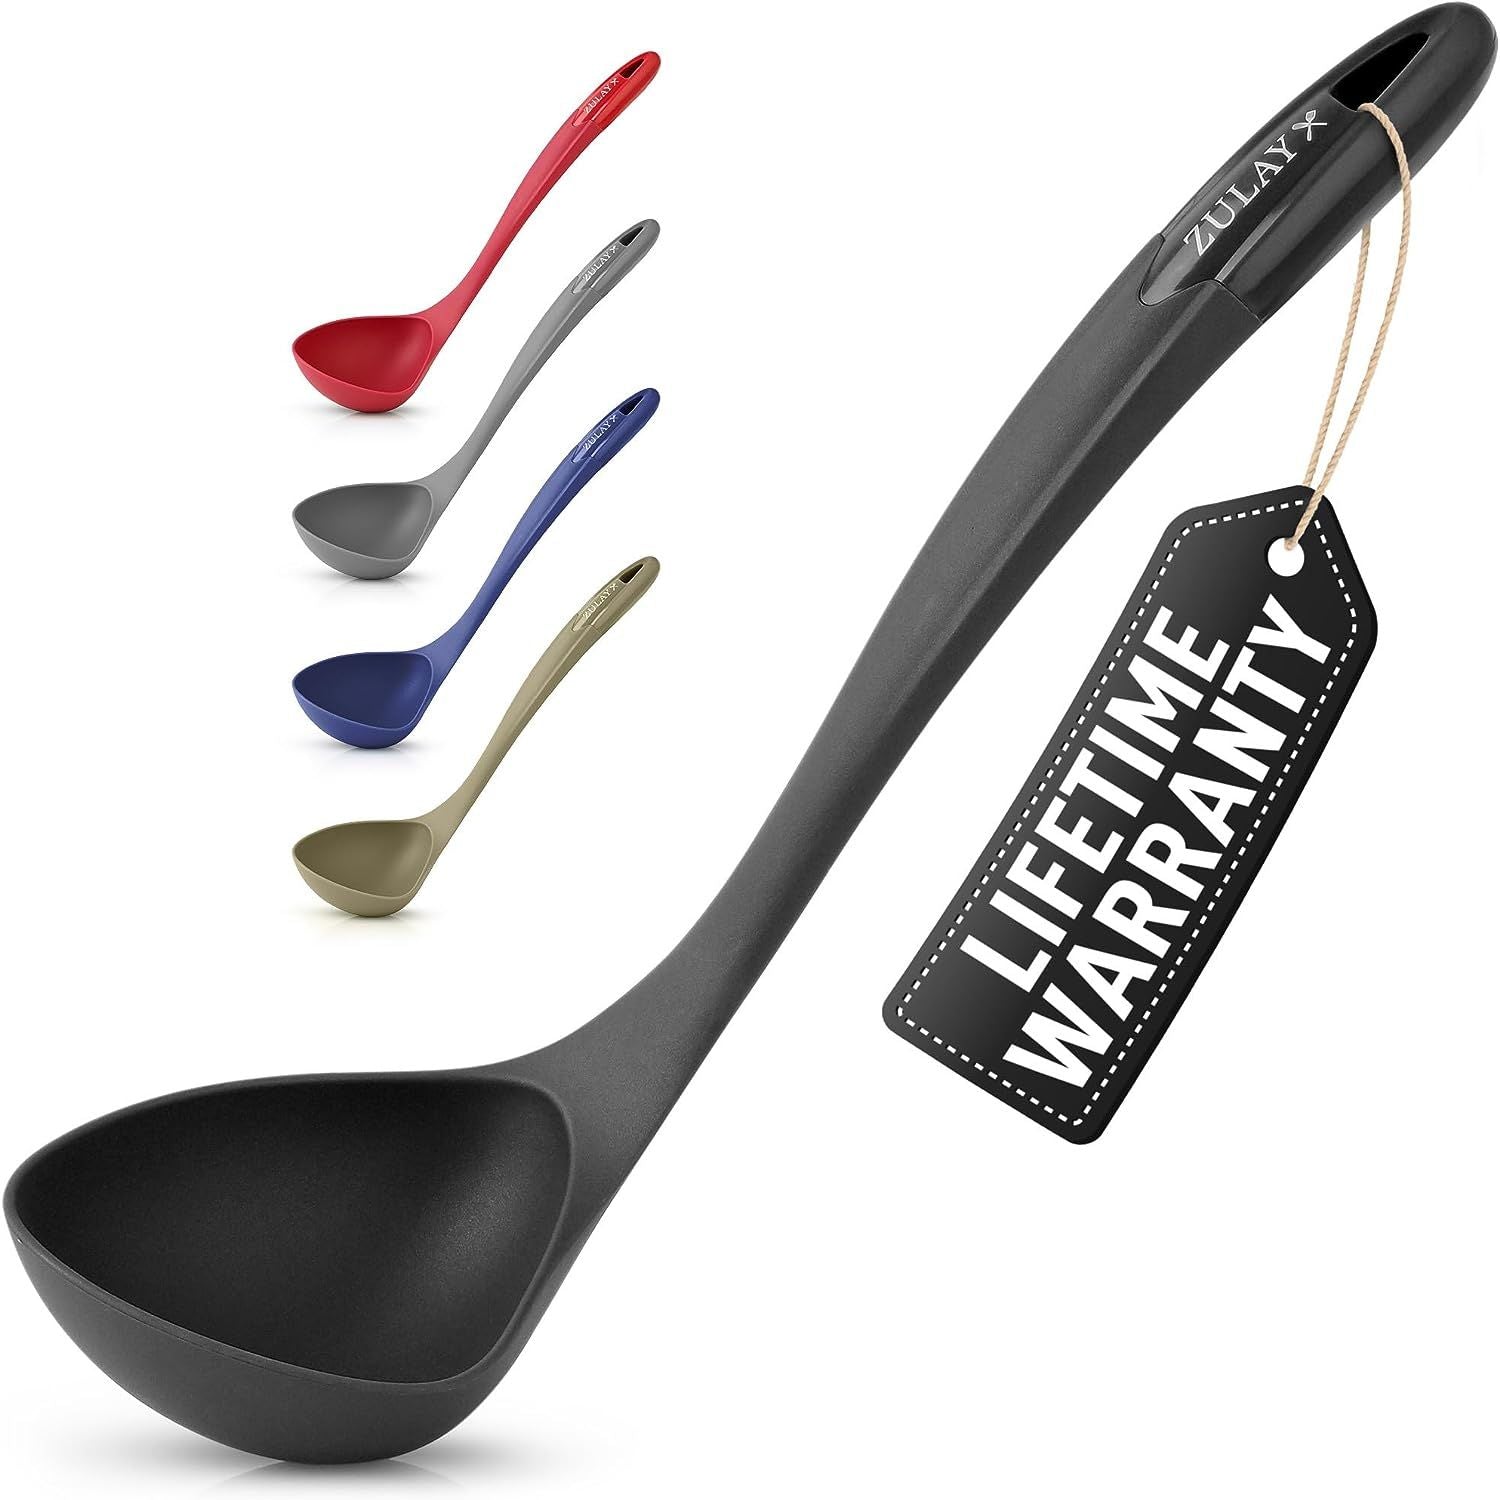 Ladle spoon by Zulay Kitchen